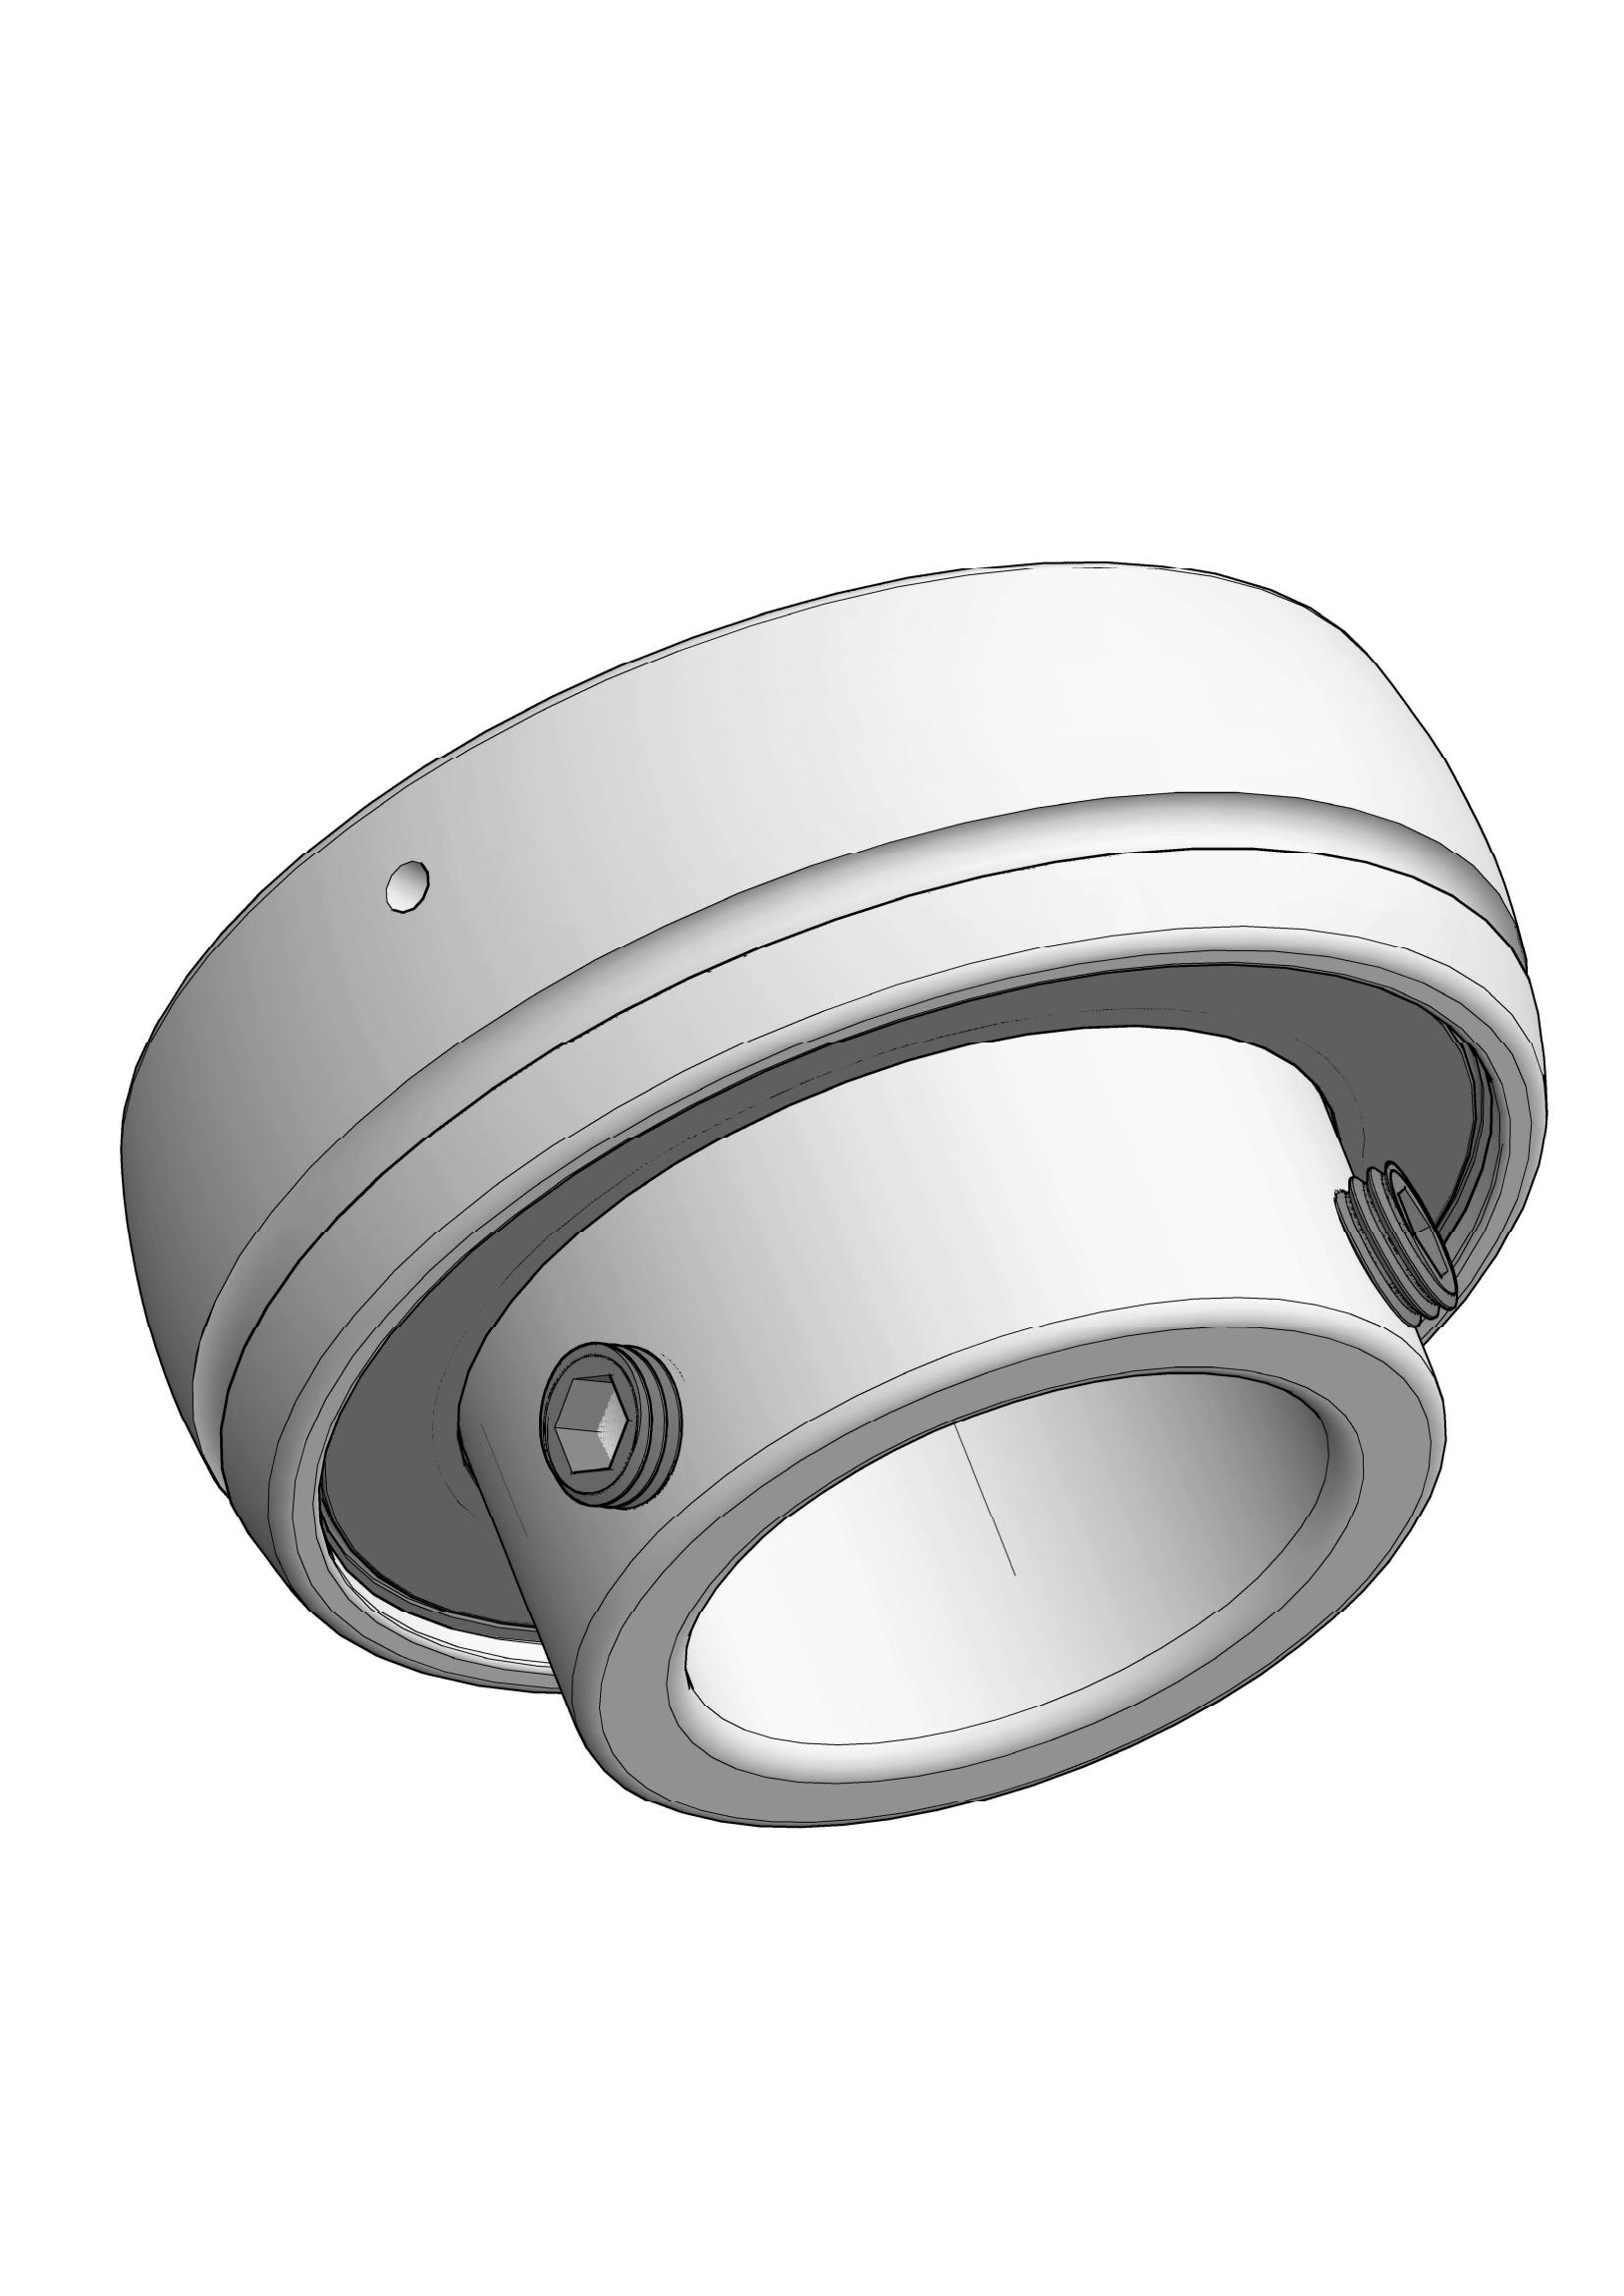 SB212 insert ball bearings with Eccentric Collar Lock with 60mm Bore